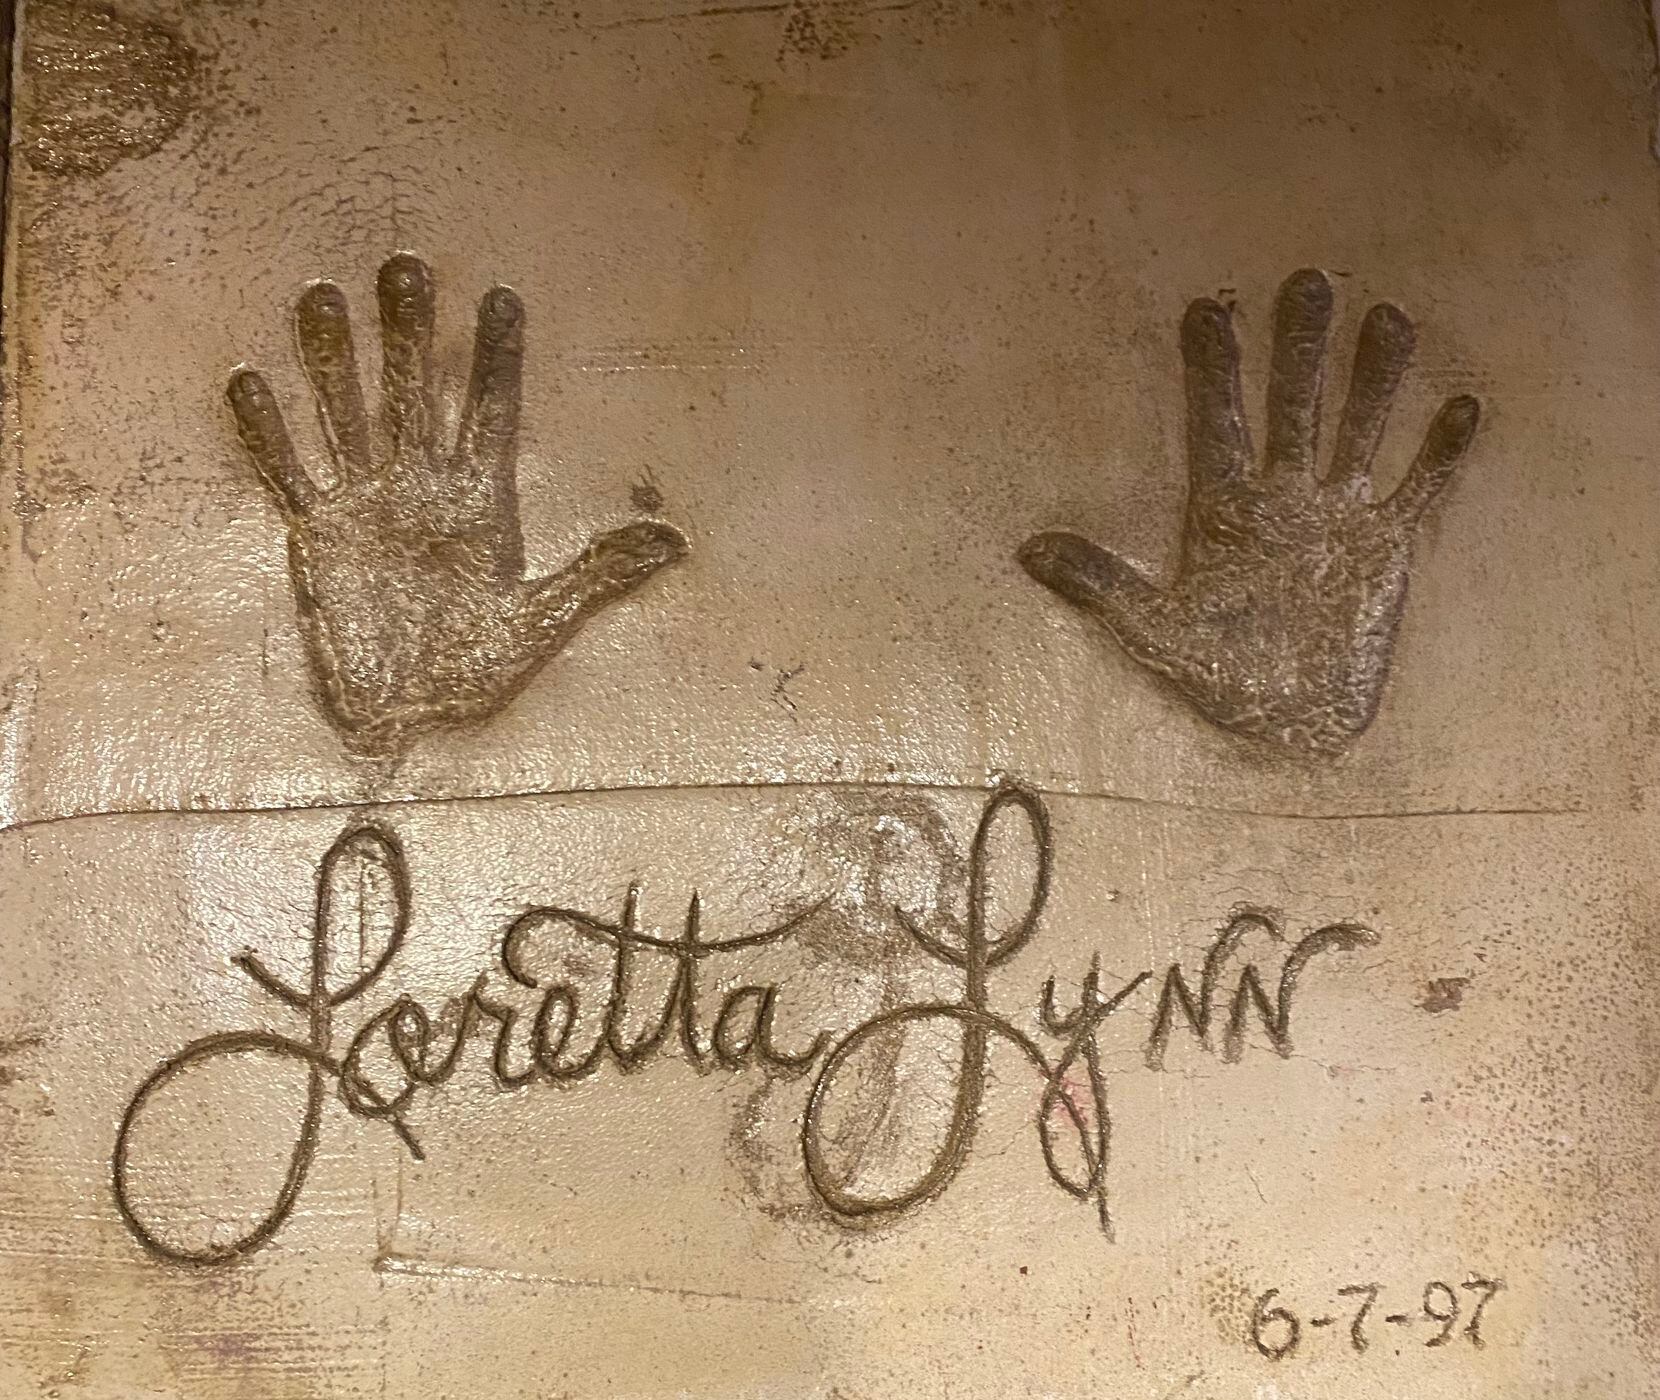 Loretta Lynn left her handprints in cement after her June 7, 1997, appearance at Billy Bob's...